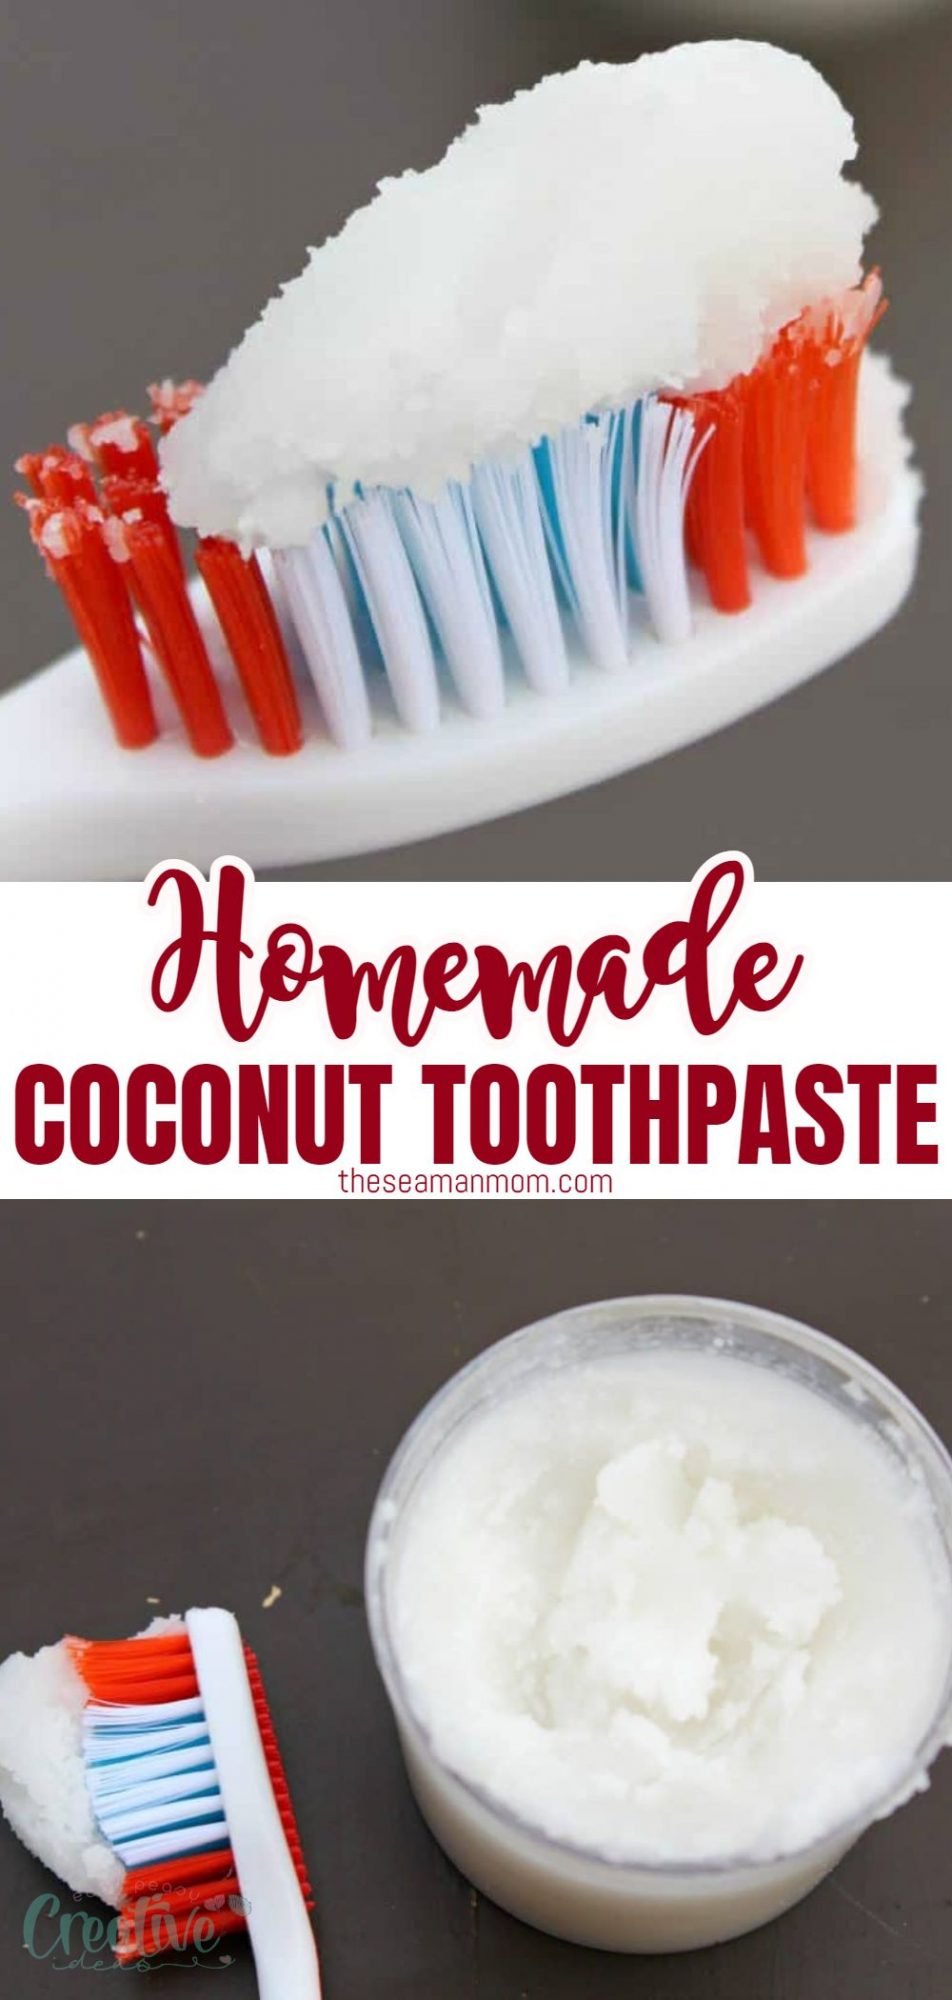 Homemade toothpaste with coconut oil